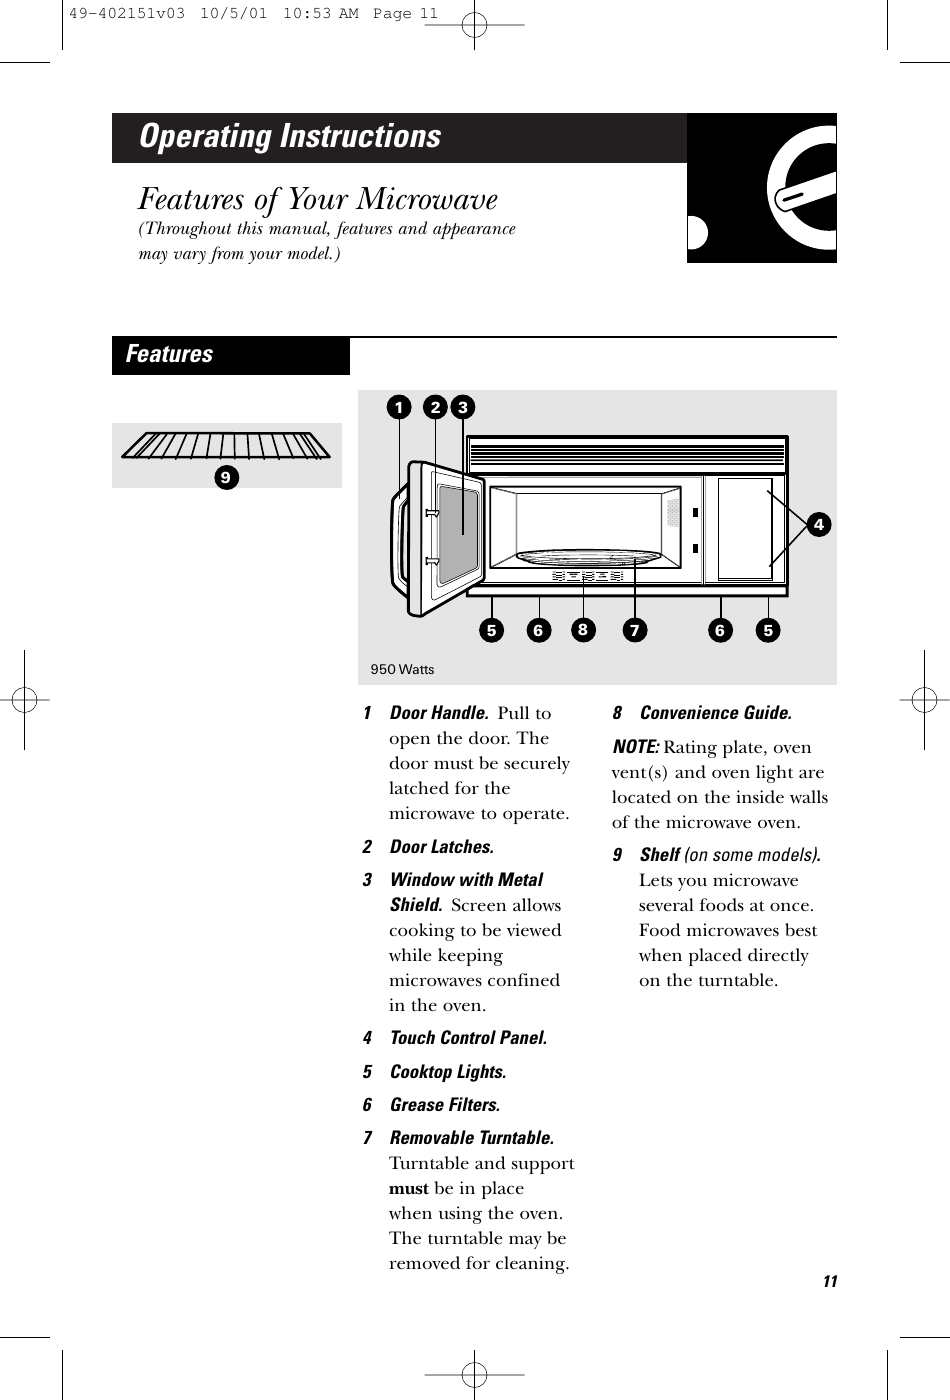 Operating InstructionsFeatures of Your Microwave(Throughout this manual, features and appearancemay vary from your model.)1 Door Handle.  Pull toopen the door. Thedoor must be securelylatched for themicrowave to operate.2 Door Latches.3 Window with MetalShield.  Screen allowscooking to be viewedwhile keepingmicrowaves confined in the oven.4 Touch Control Panel. 5 Cooktop Lights.6 Grease Filters.7 Removable Turntable.Turntable and supportmust be in place when using the oven.The turntable may beremoved for cleaning.8 Convenience Guide.NOTE: Rating plate, ovenvent(s) and oven light arelocated on the inside wallsof the microwave oven.9 Shelf (on some models).Lets you microwaveseveral foods at once.Food microwaves bestwhen placed directly on the turntable.Features32155687116950 Watts4949-402151v03  10/5/01  10:53 AM  Page 11